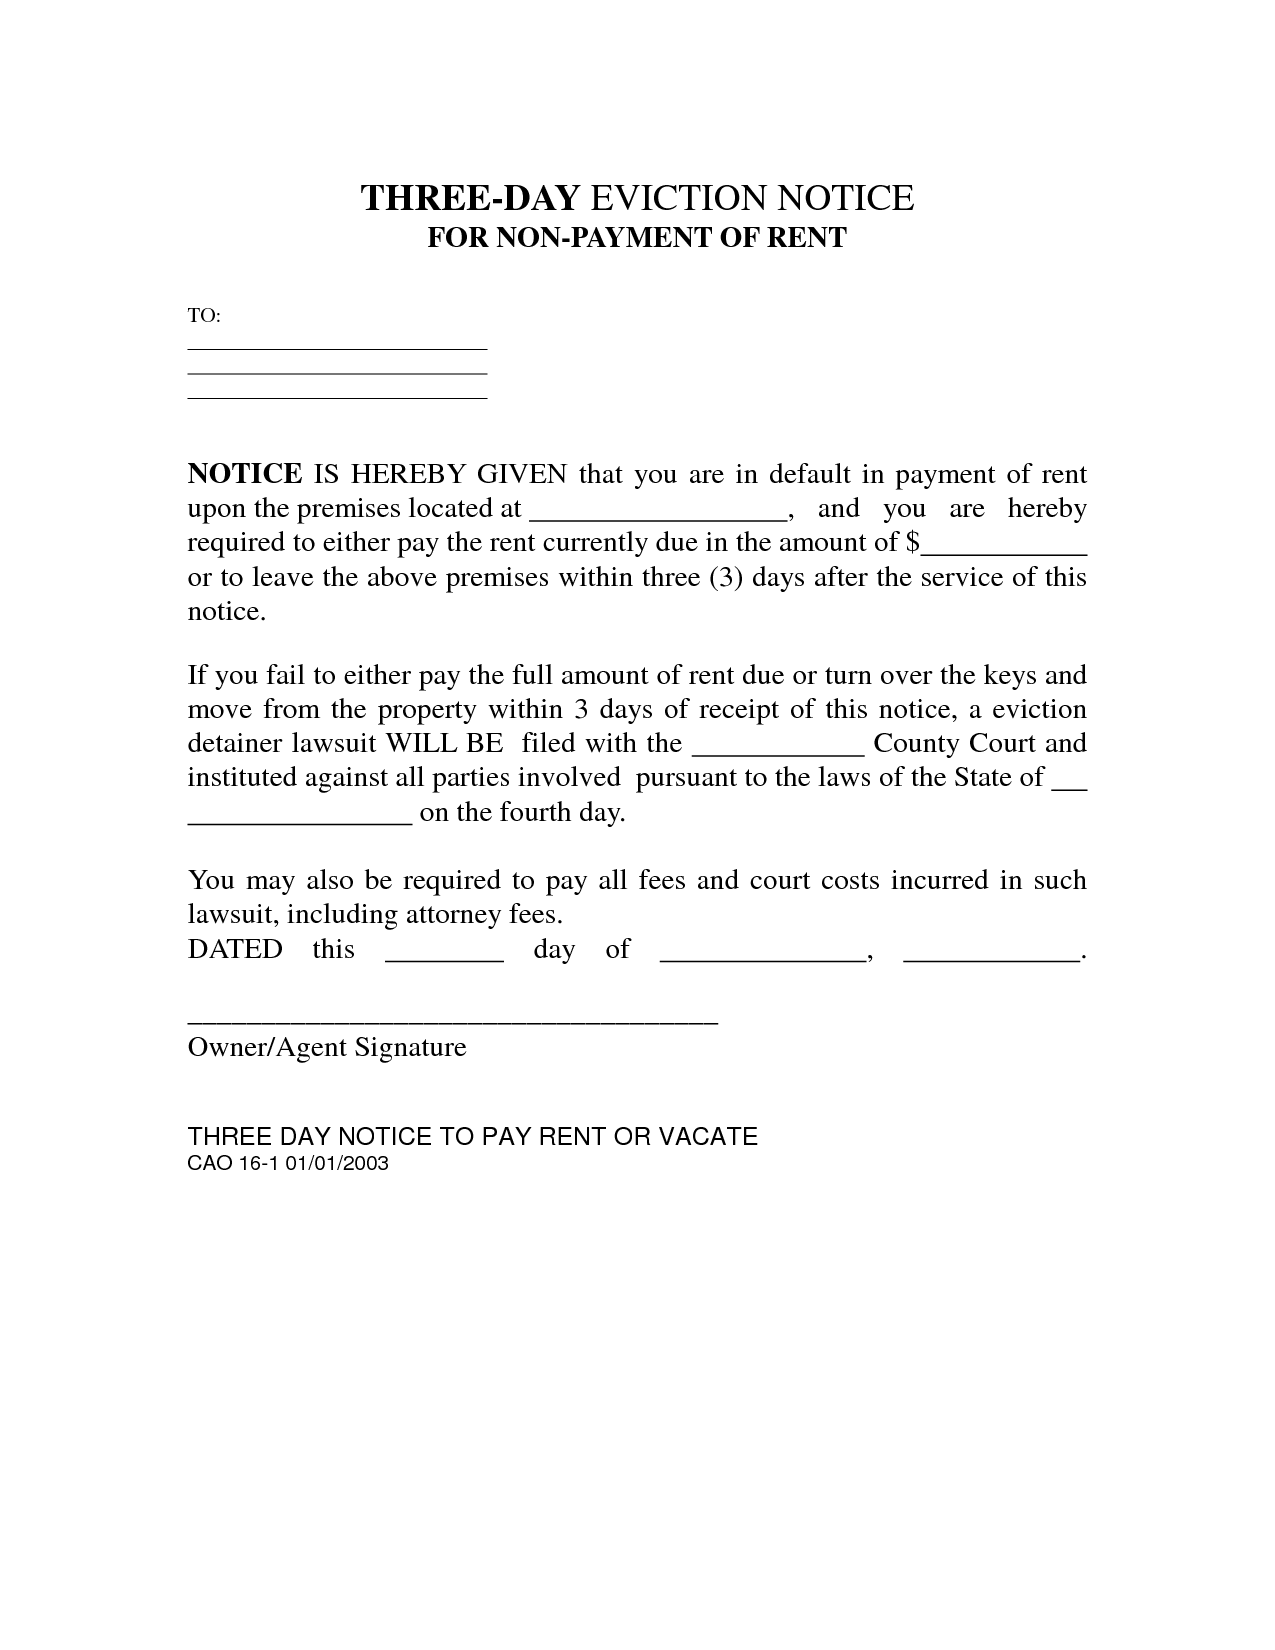 eviction-notice-template-free-printable-documents